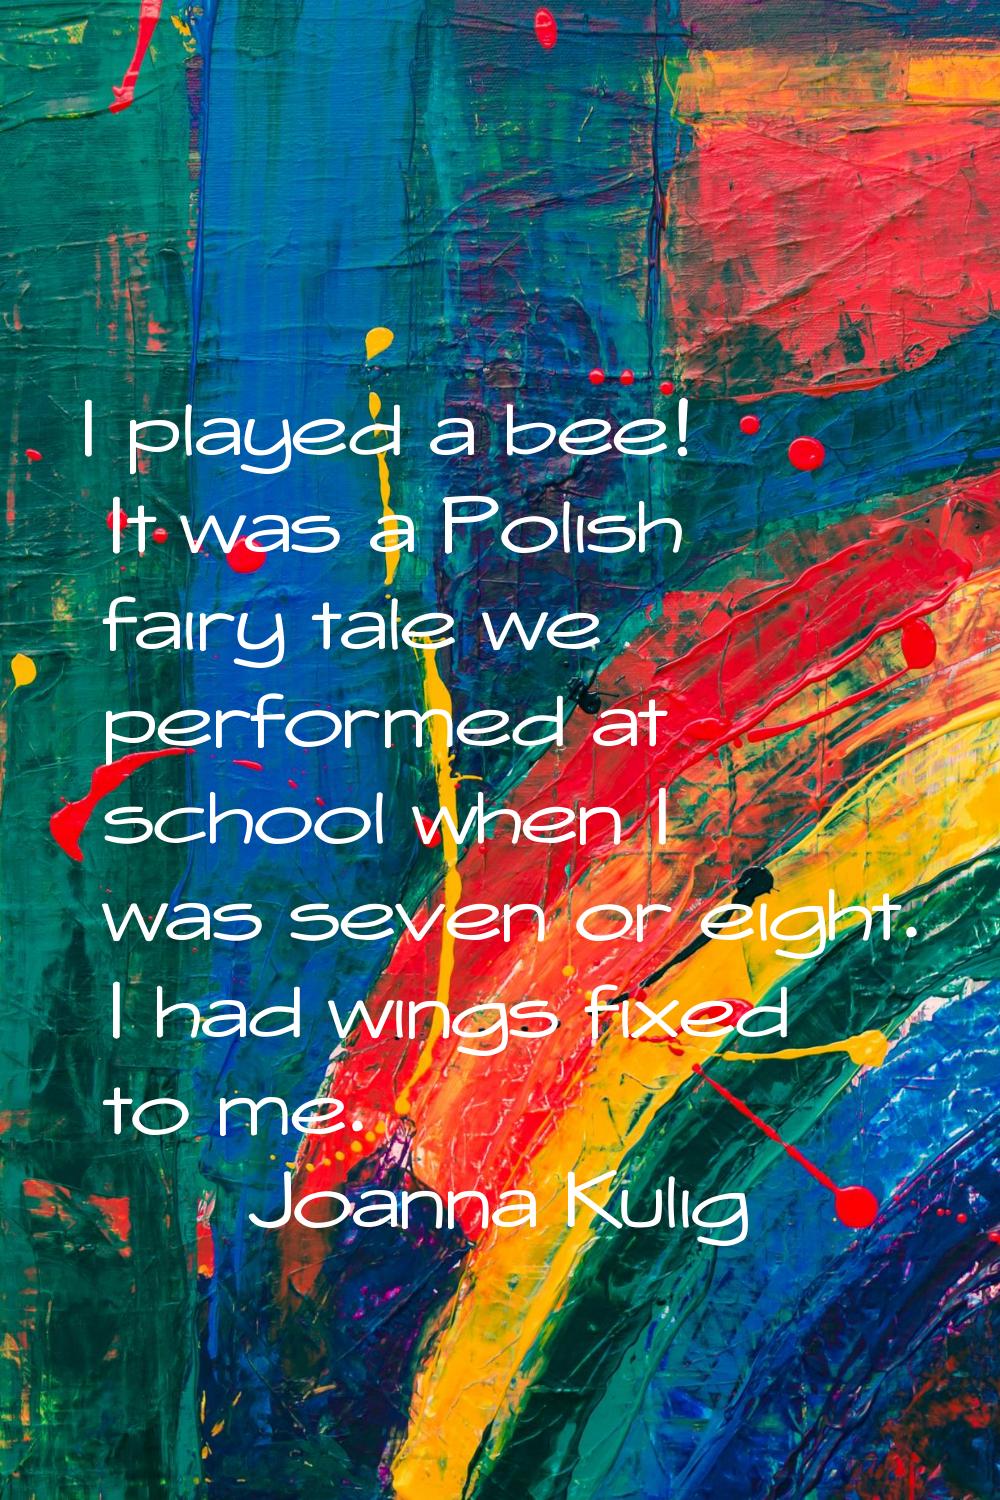 I played a bee! It was a Polish fairy tale we performed at school when I was seven or eight. I had 